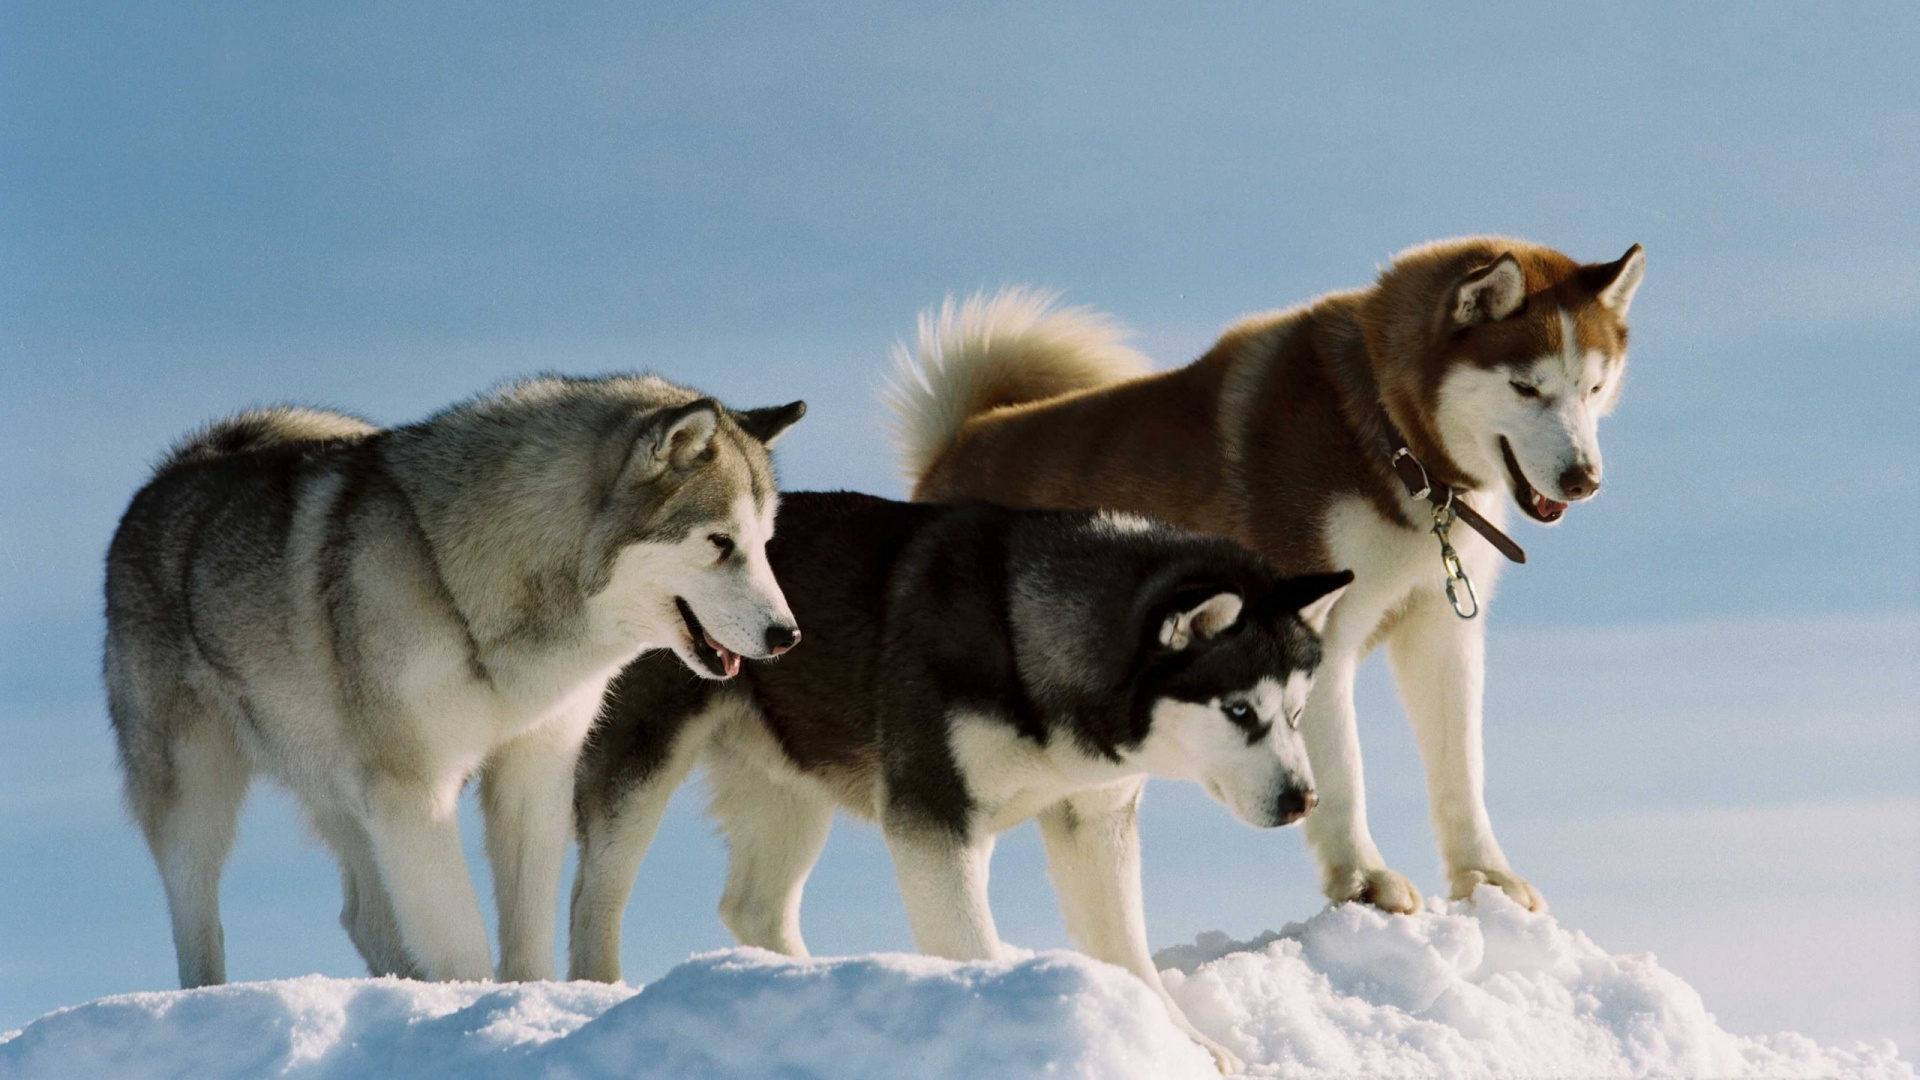 White and Black Siberian Husky on Snow Covered Ground During Daytime. Wallpaper in 1920x1080 Resolution